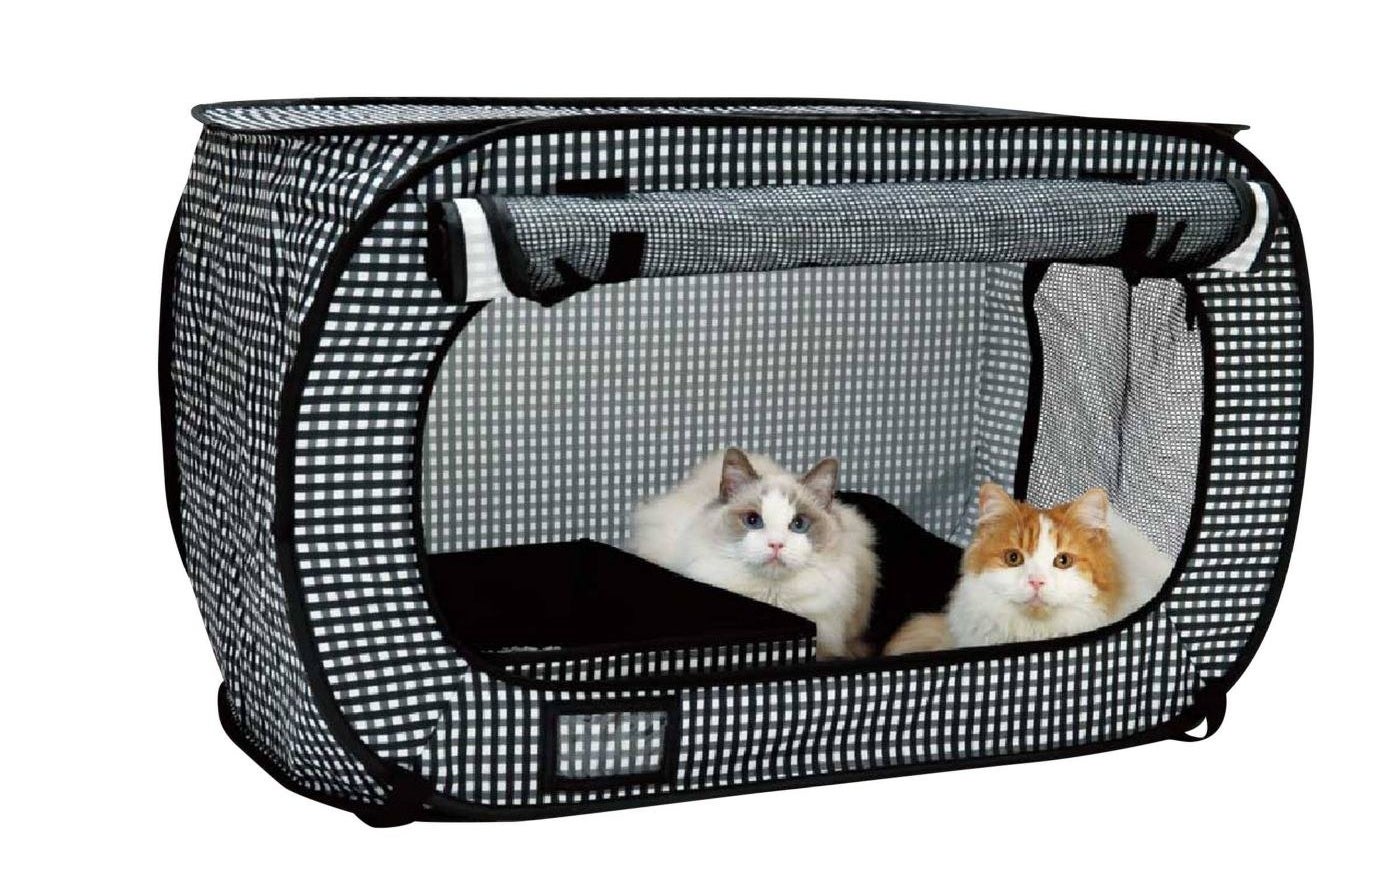 portable cat holder with 2 cats inside